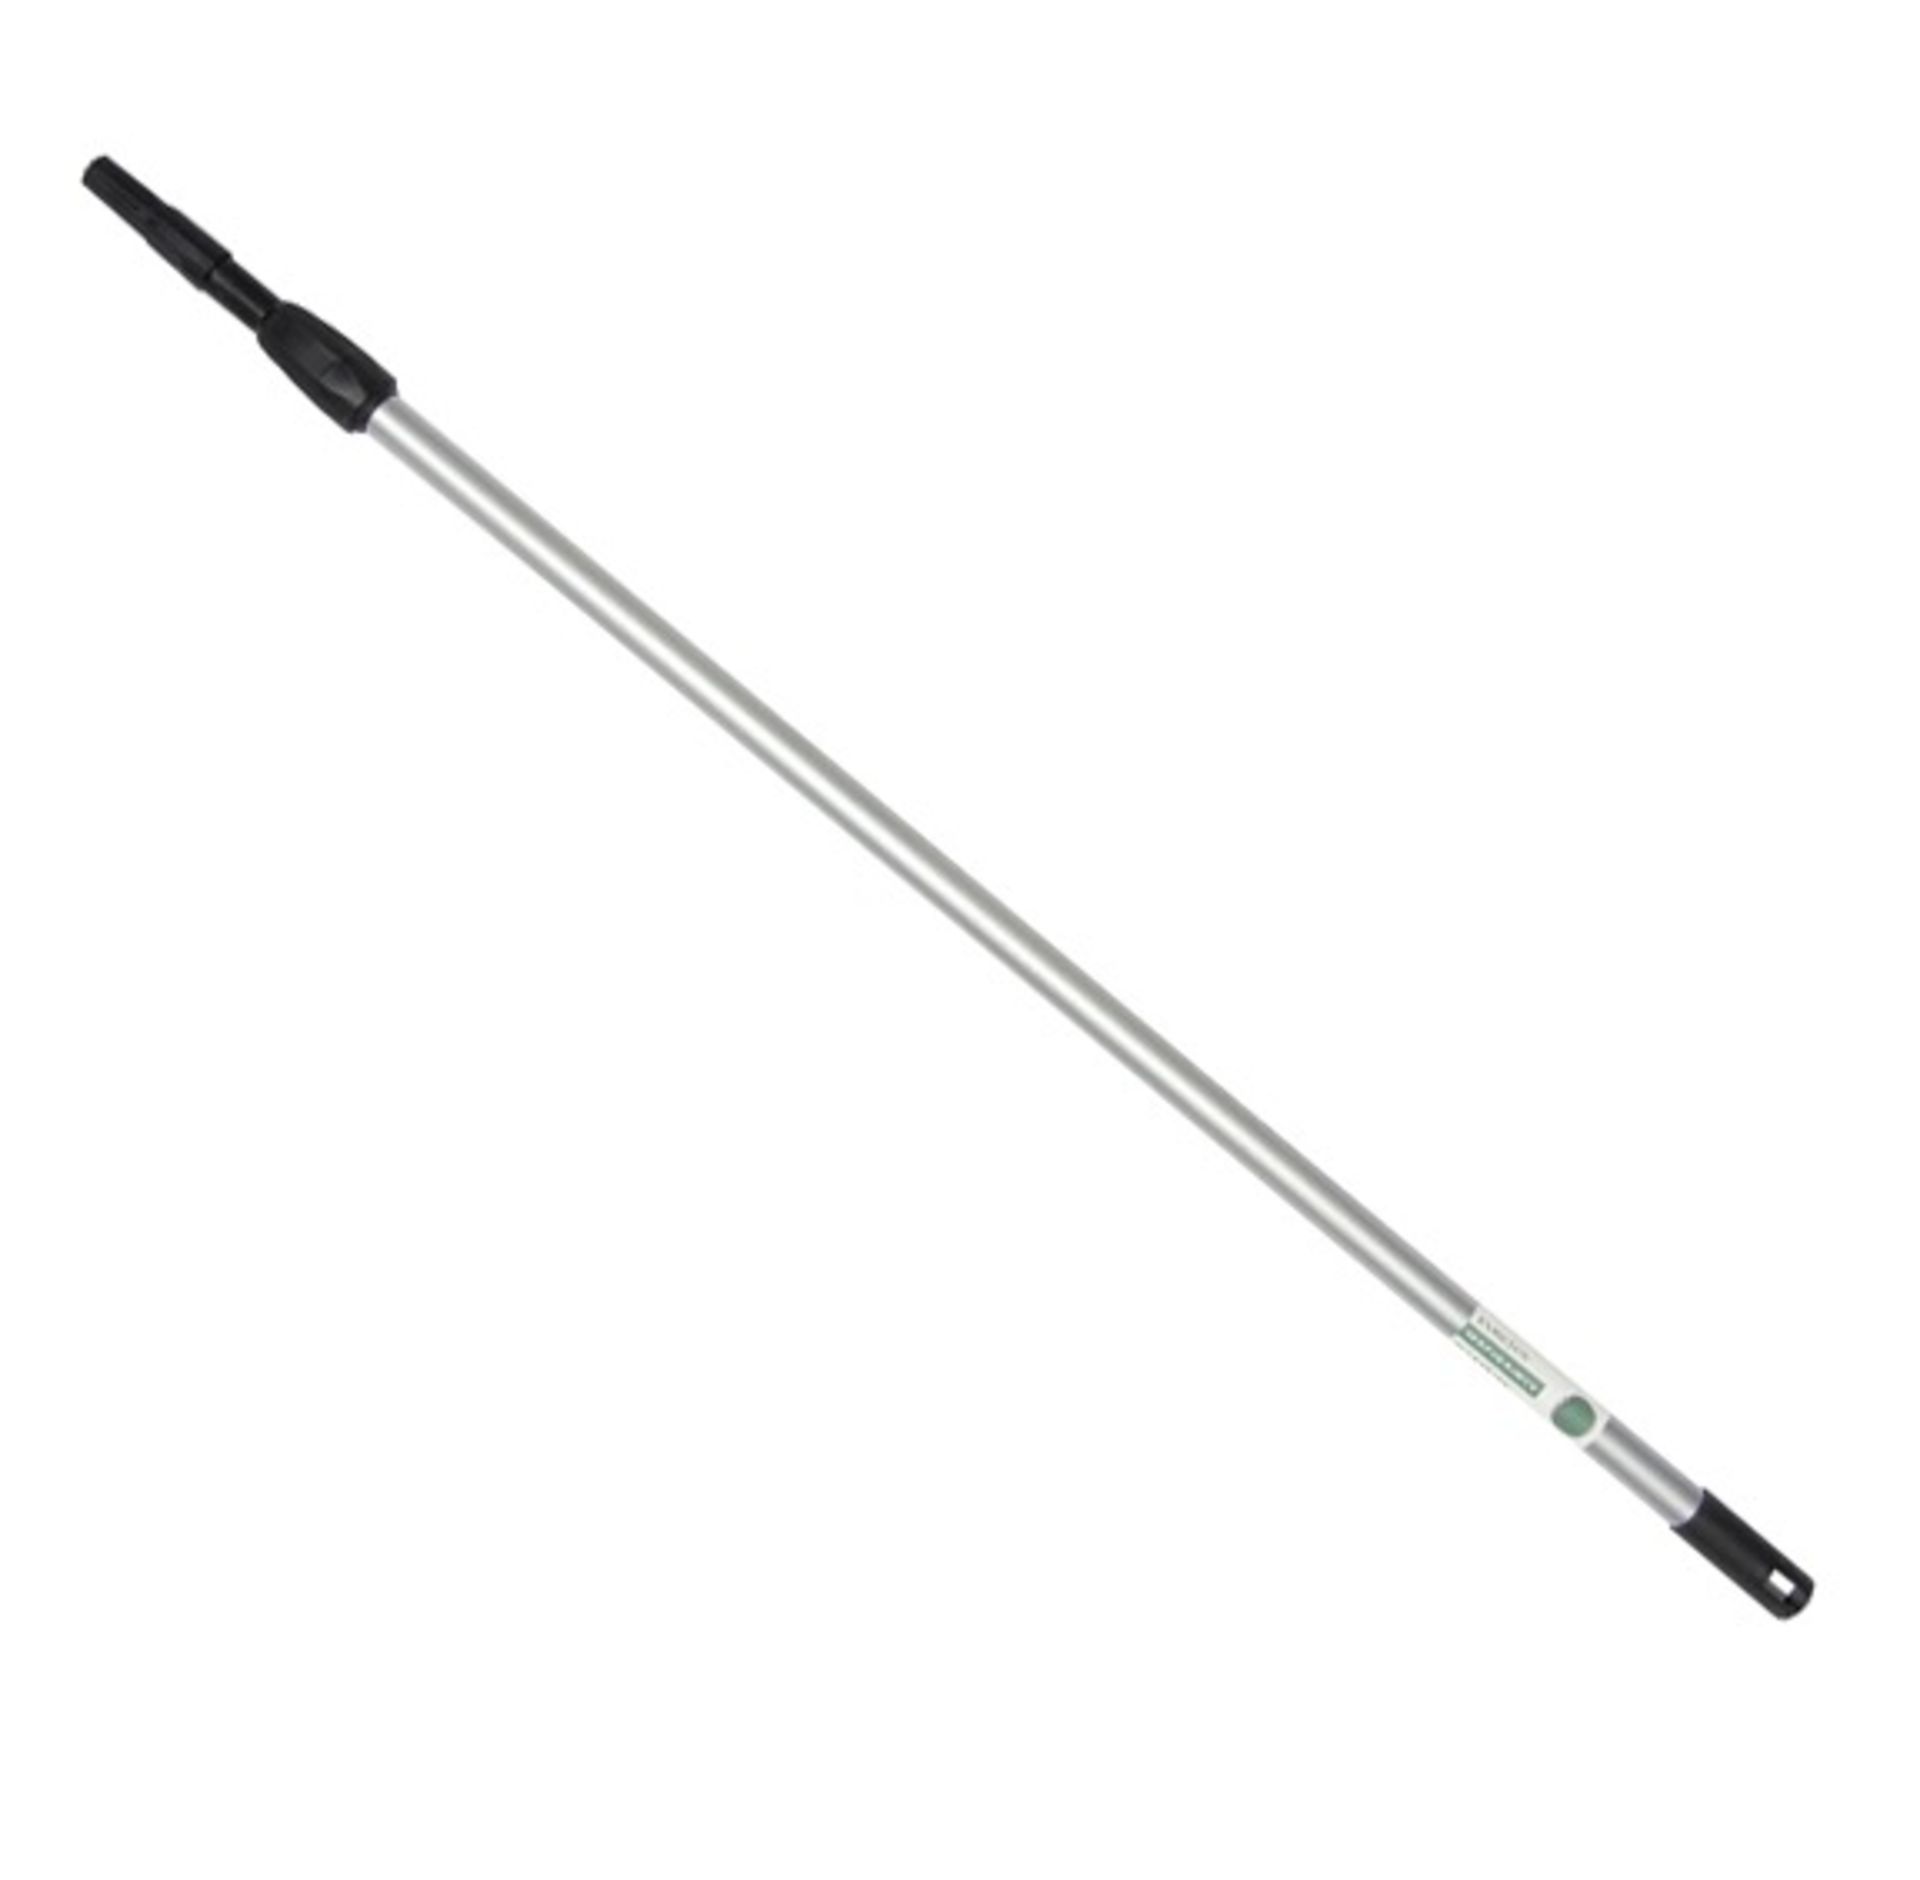 17 x Hamilton Easy Lightweight Extension Pole. Long 109-190cm. Click-lock extension pole fitting.